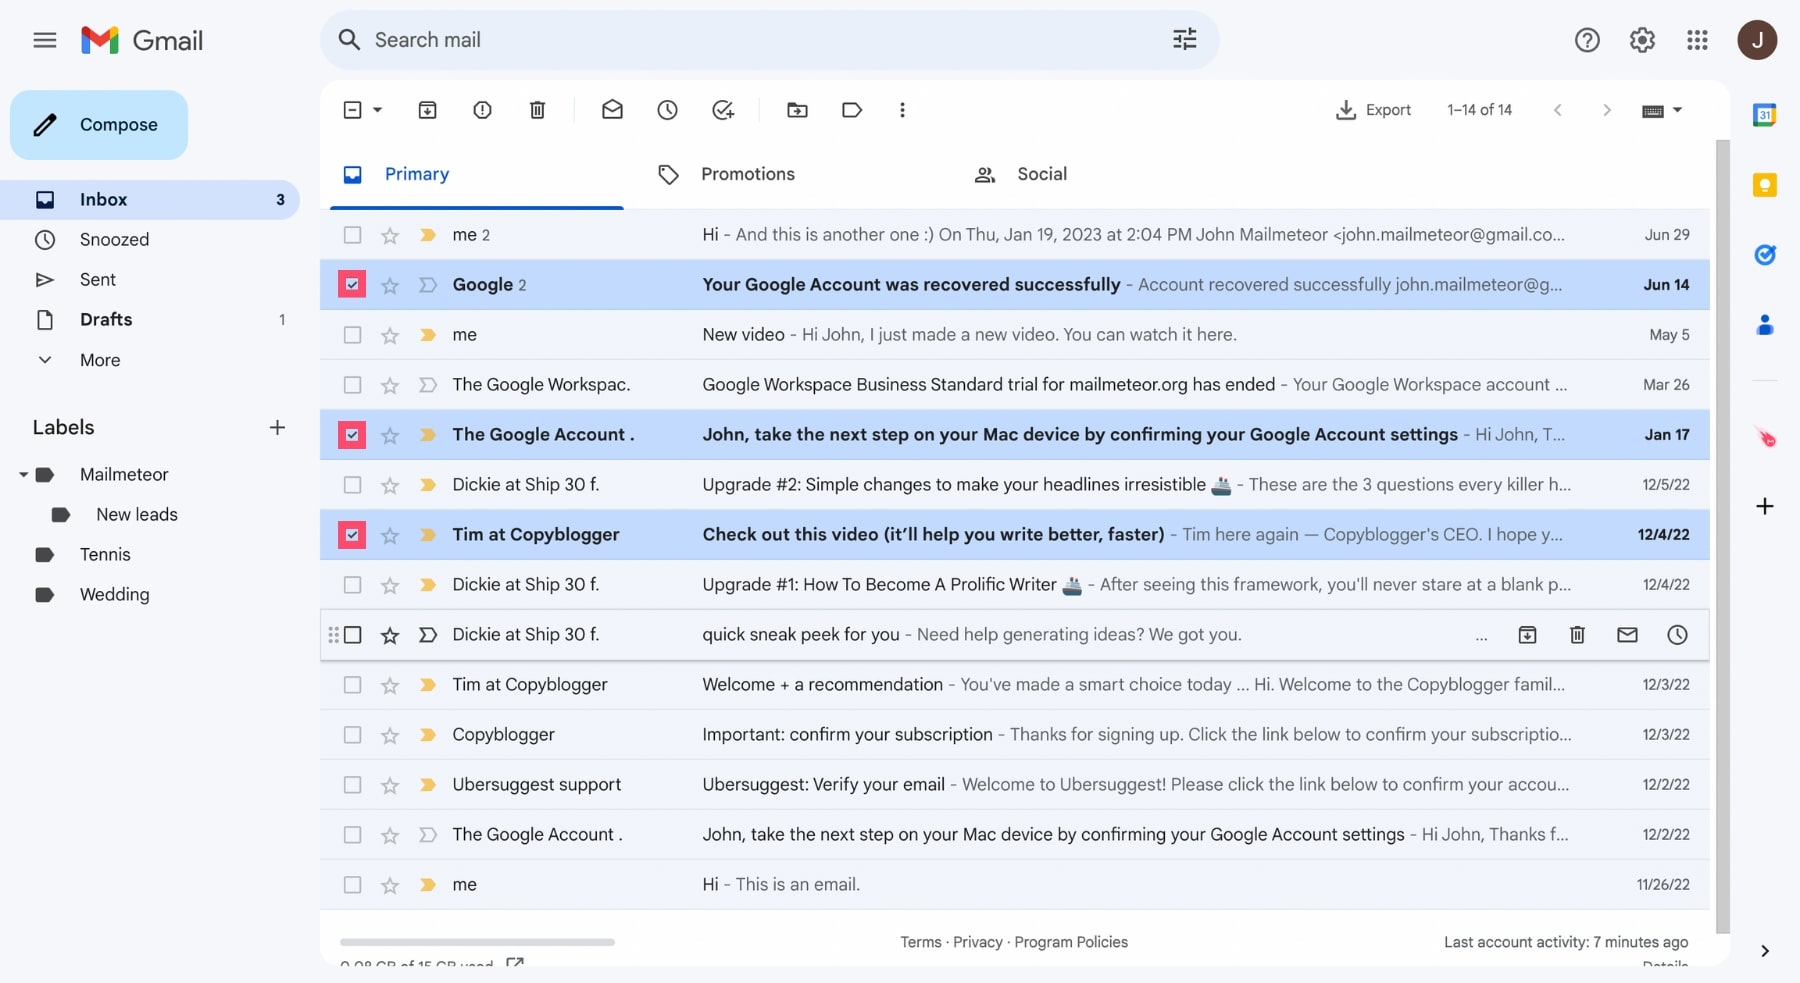 Select multiple emails in Gmail